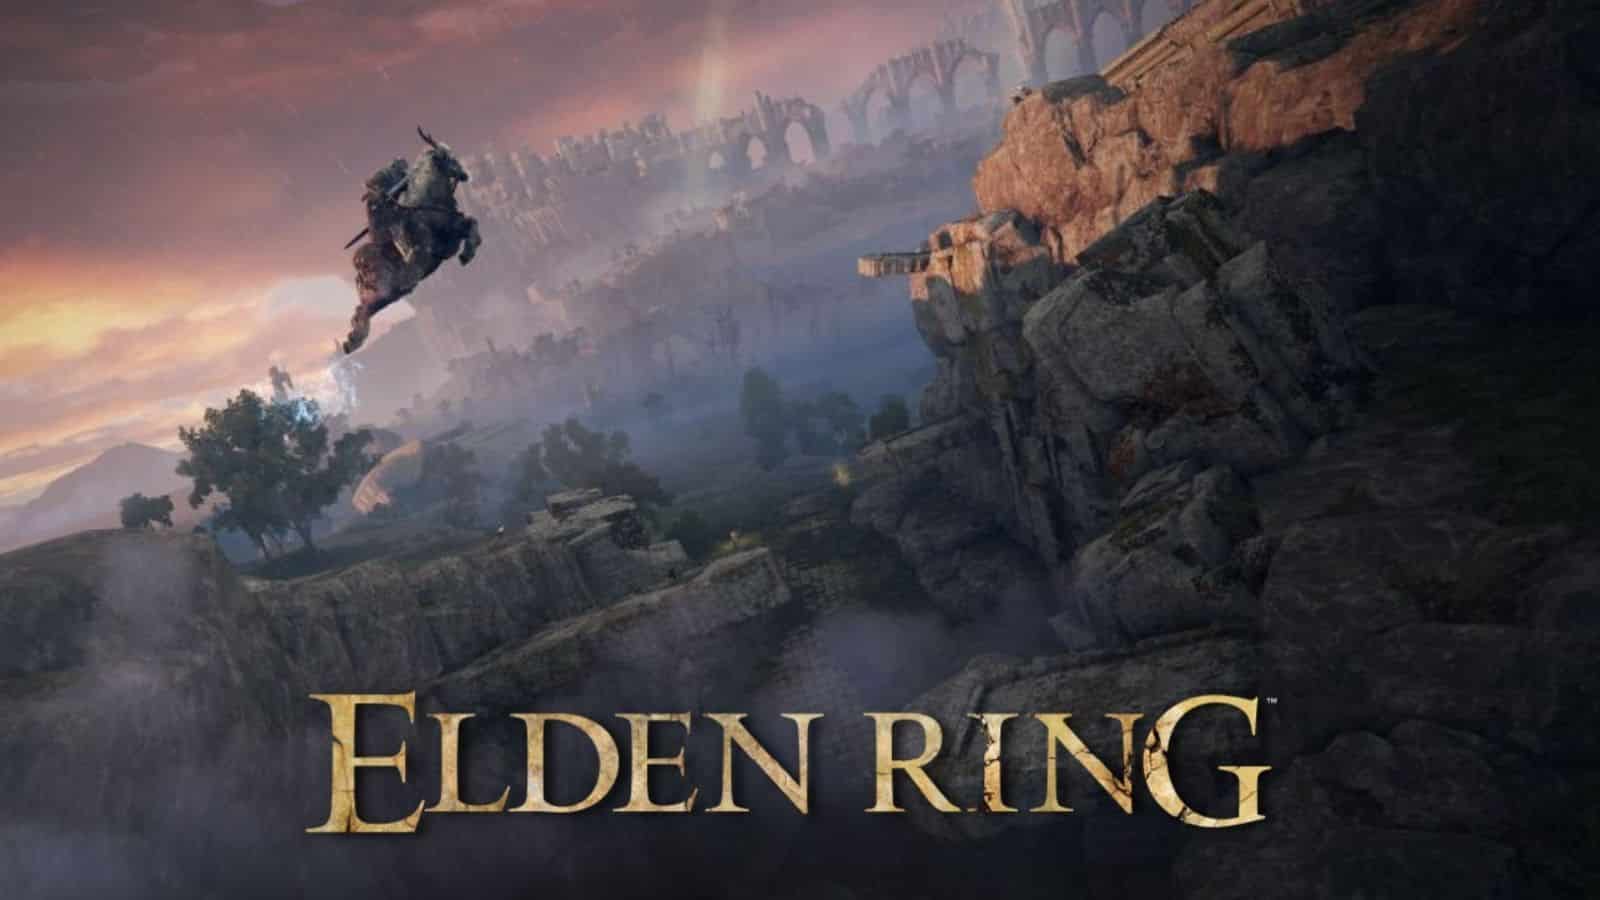 Is Elden Ring cross-platform for PC, PS5, and Xbox?